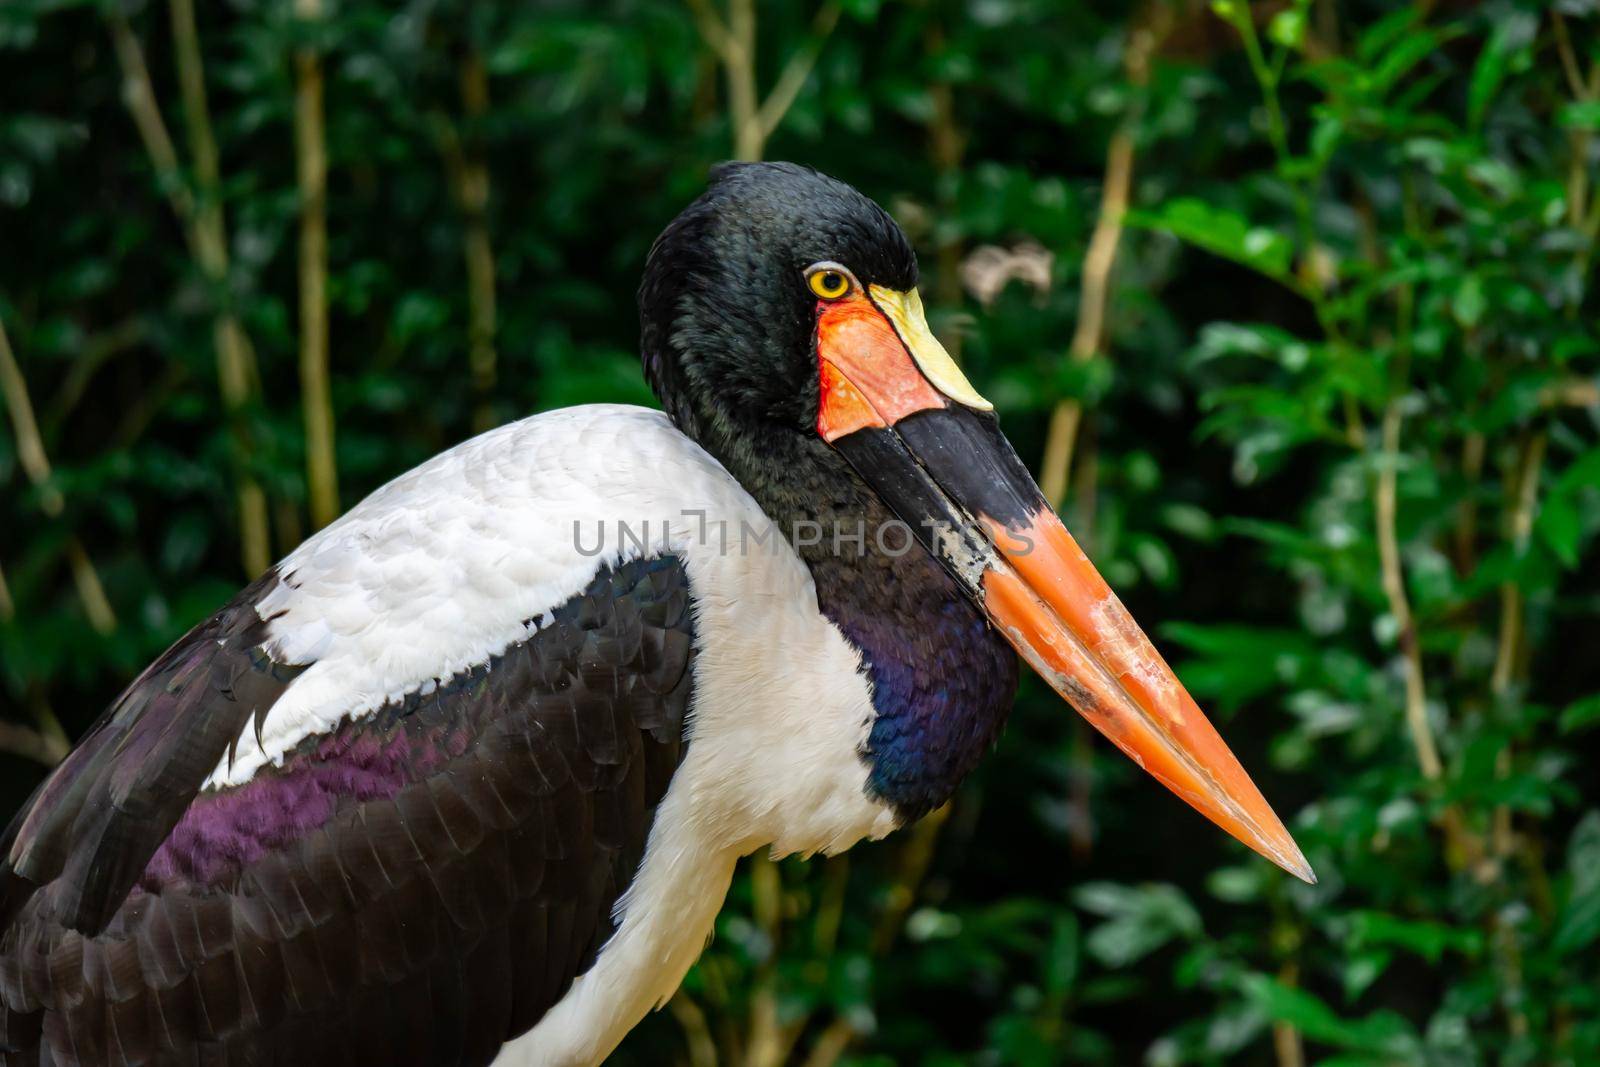 Closeup shot of a Saddle billed stork Ephippiorhynchus senegalensis on a zoo in Singapore. Colorful wildlife photo with green background